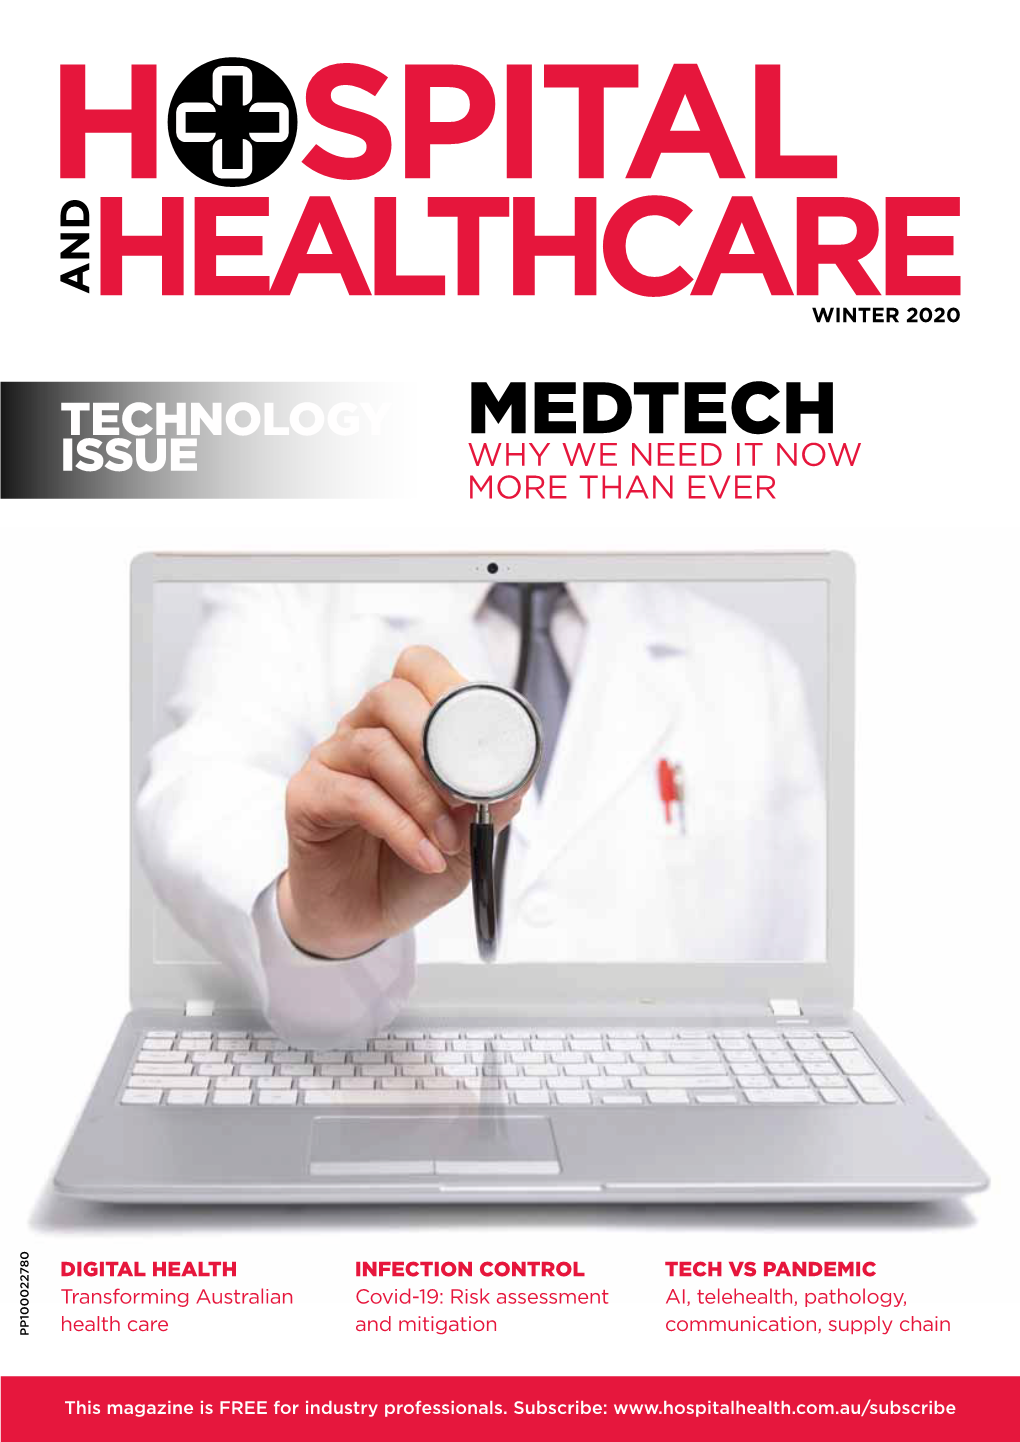 MEDTECH Issue WHY WE NEED IT NOW MORE THAN EVER